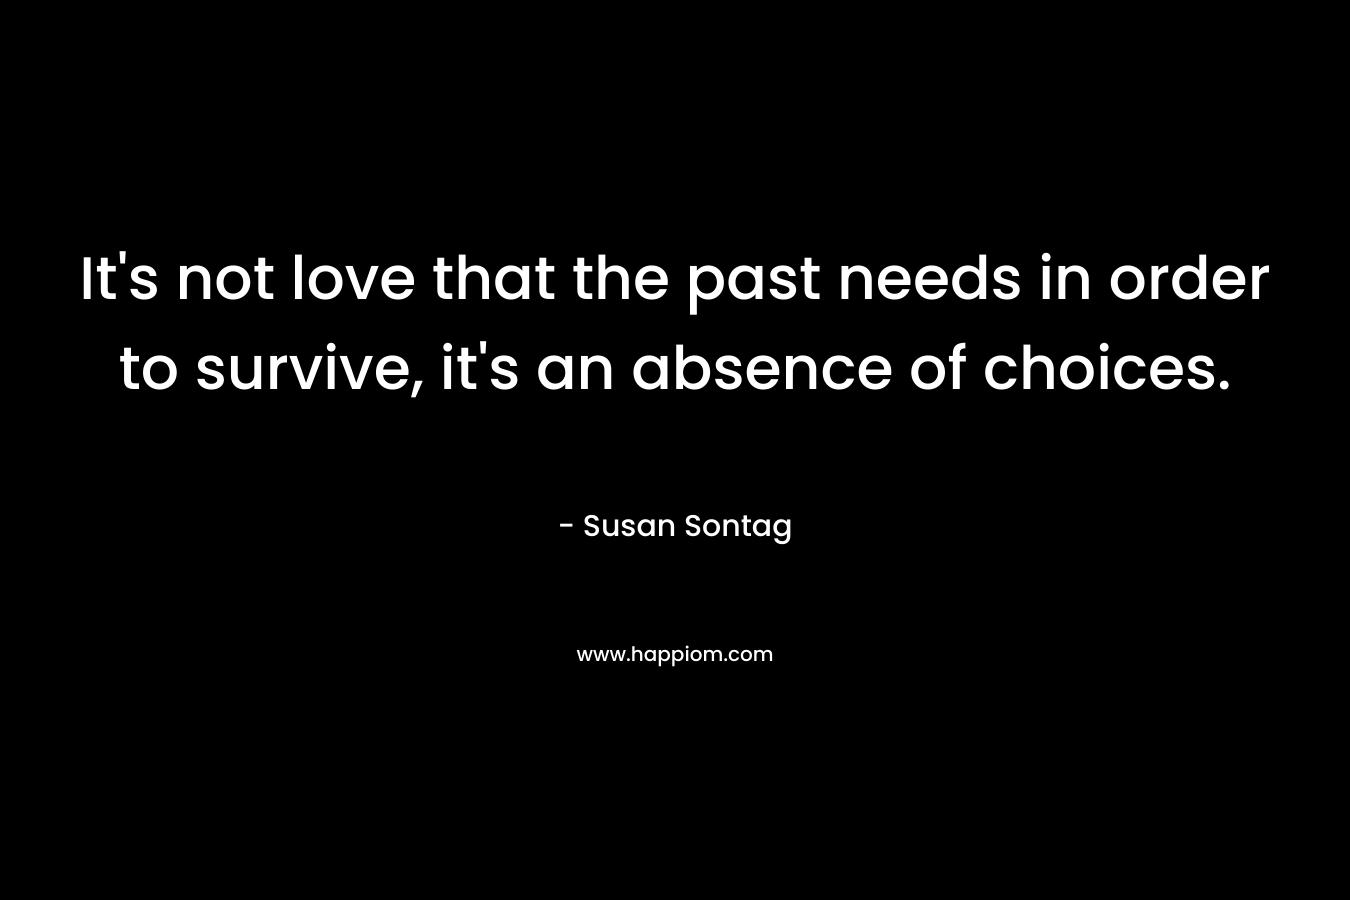 It’s not love that the past needs in order to survive, it’s an absence of choices. – Susan Sontag